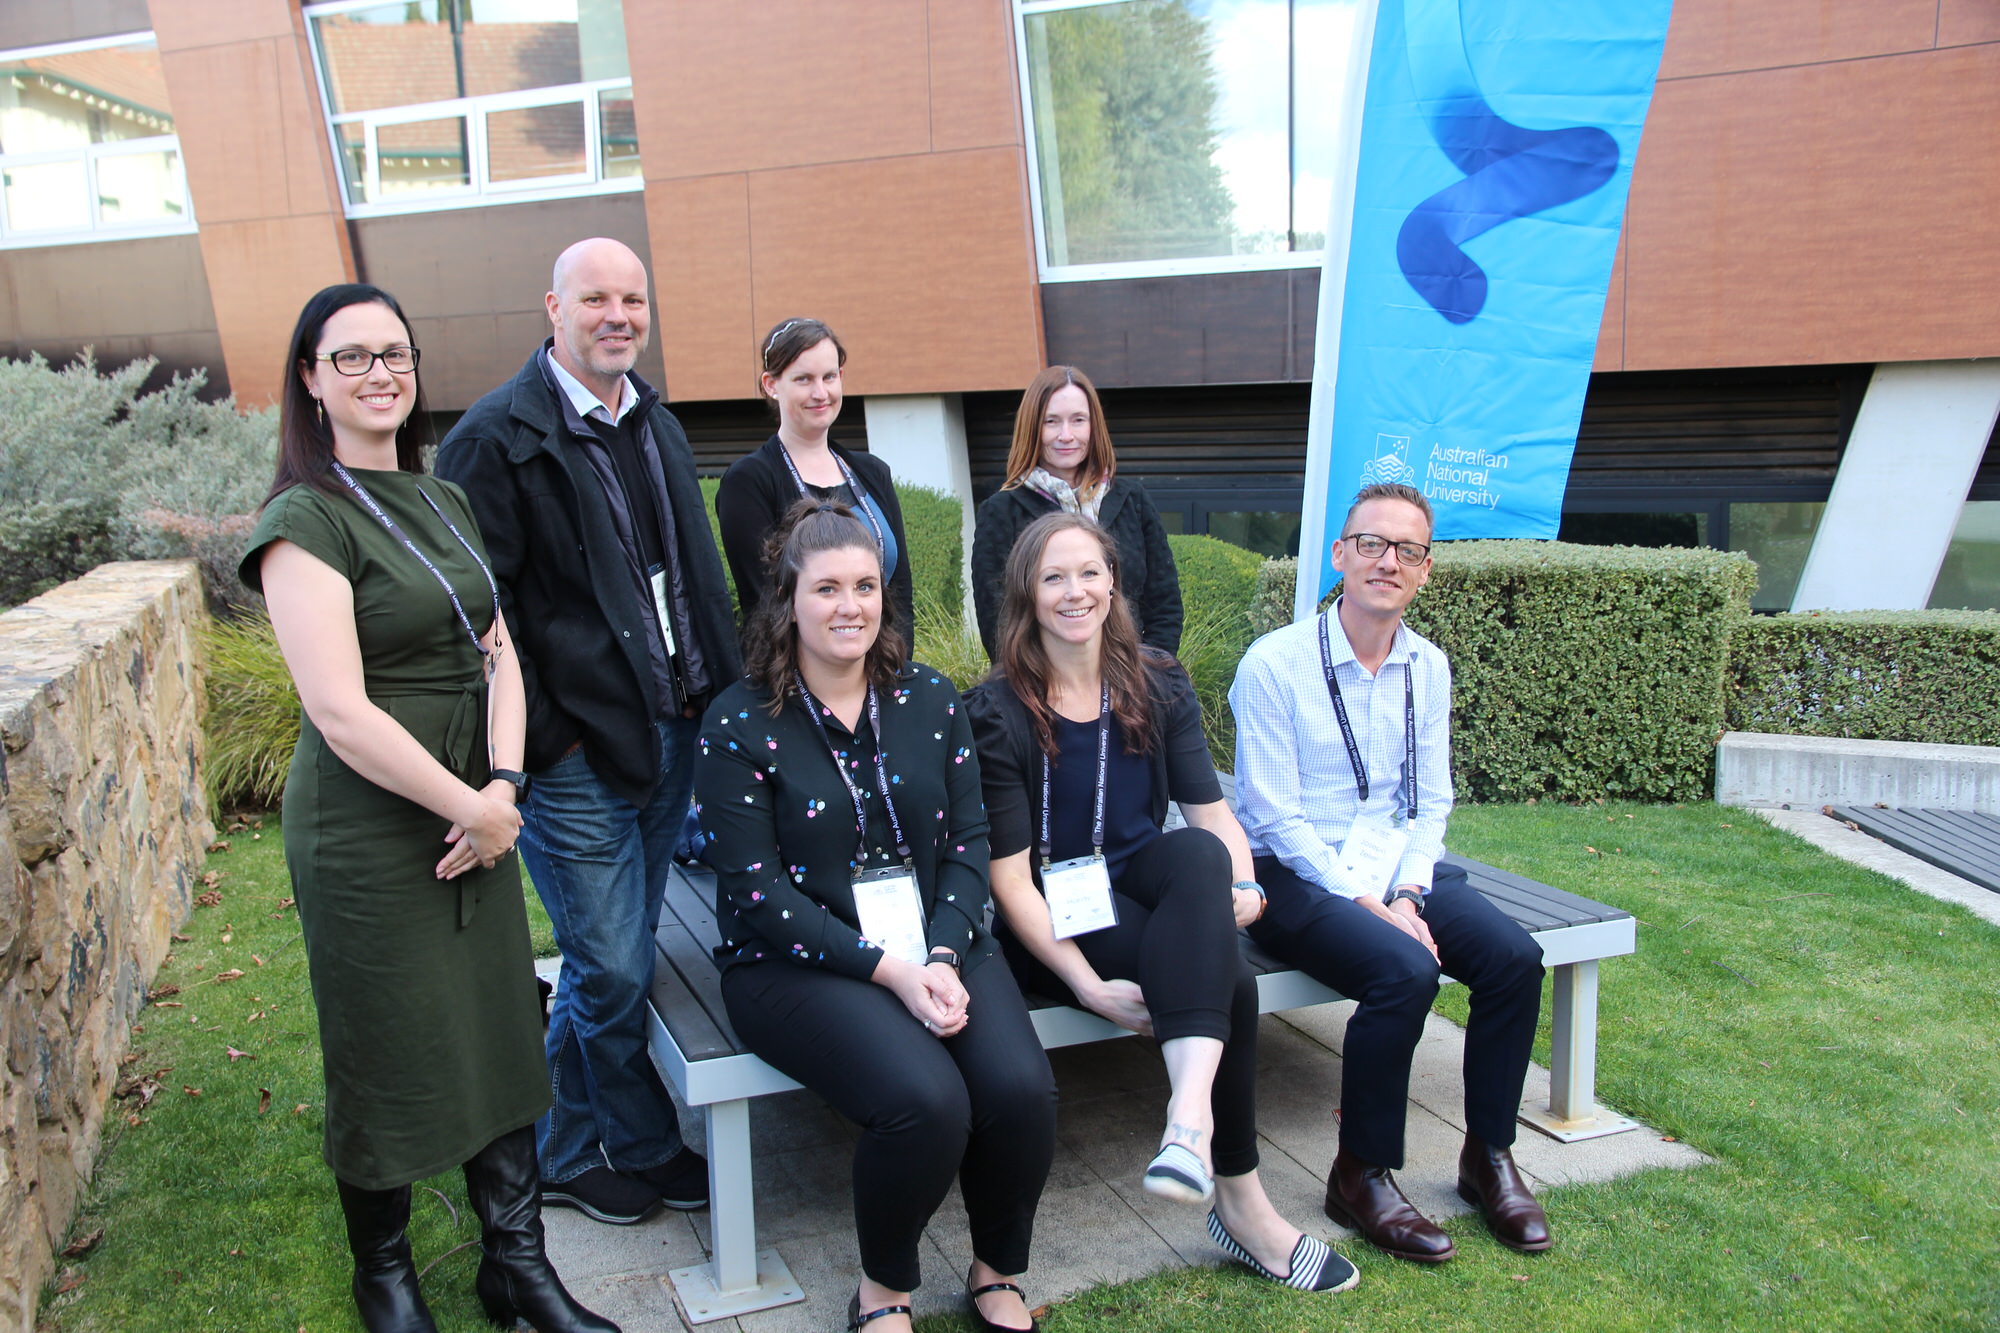 IPAA’s future leaders (Back row, left to right: Geraldine Edwards, Stephen Derieve, Jennifer Duke, Melanie Fisher. Front row, left to right: Leah Finnigan, Jess Hardy and Joseph Zeller).